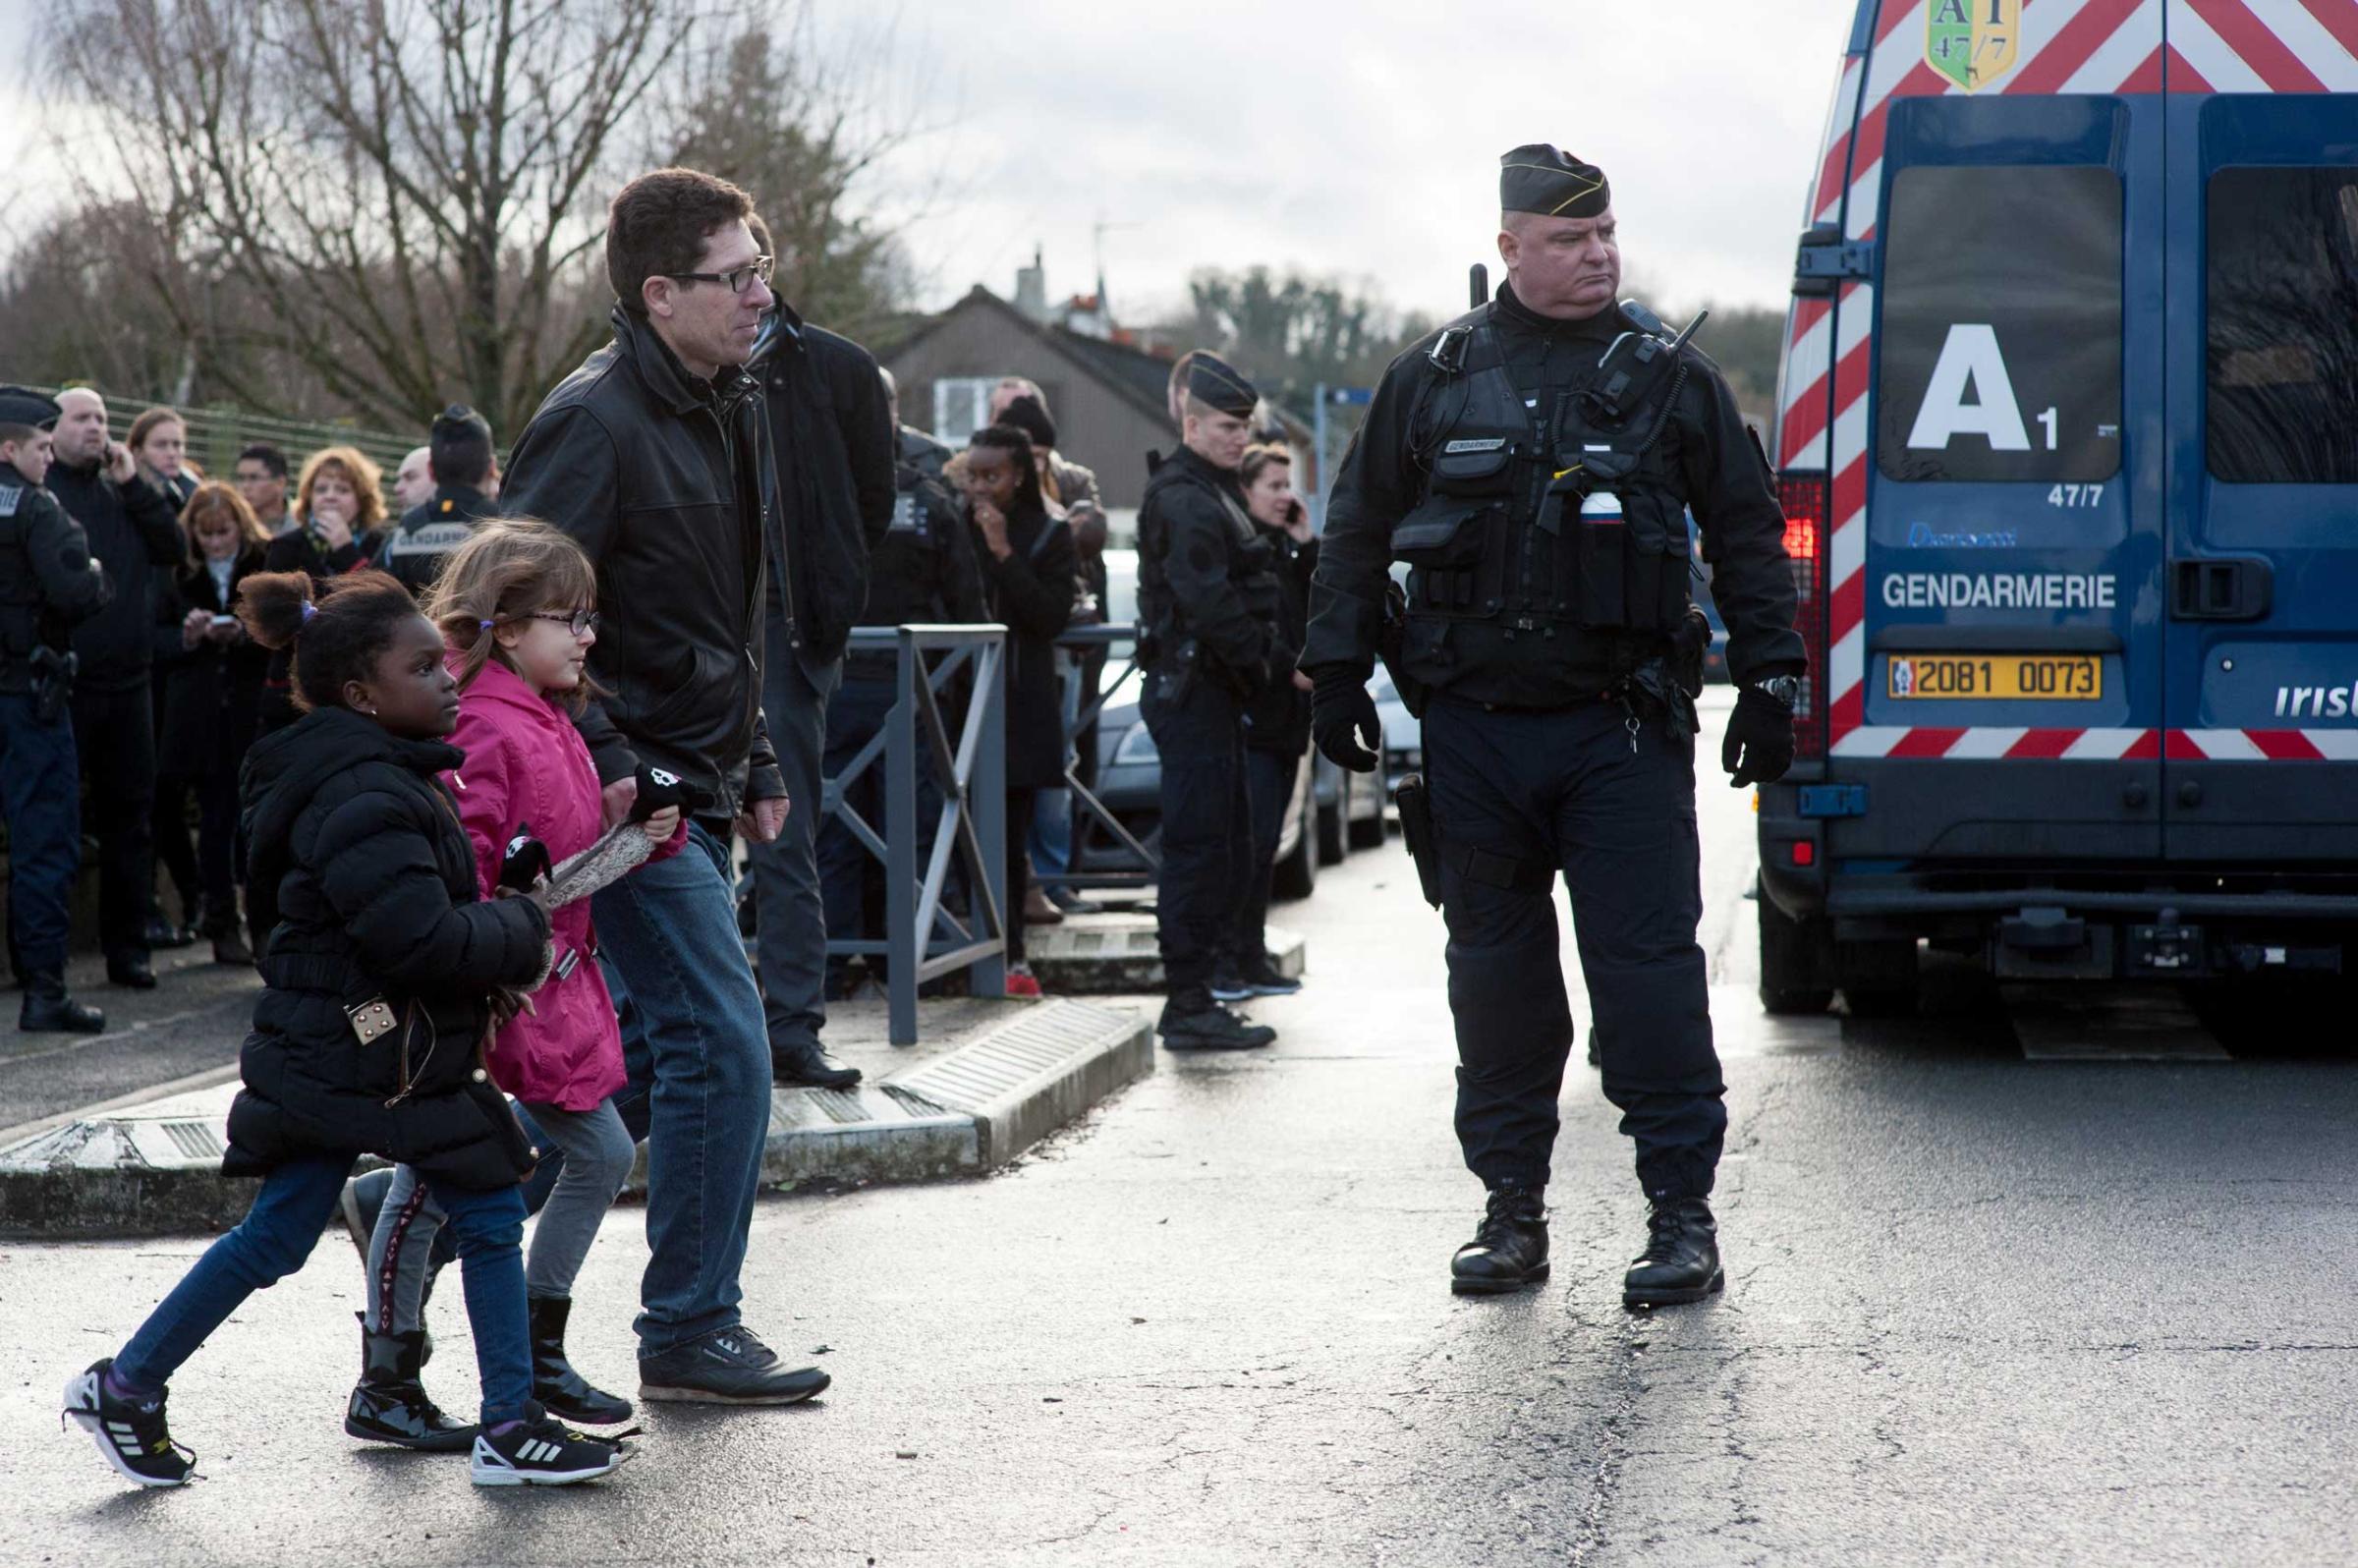 Police forces evacuate the children of the Henry-Dunant primary school located next to printing company Creation Tendance Decouverte CTD, where the two Charlie Hebdo gunmen are detaining a hostage, in Dammartin-en-Goele, north of Paris, France on Jan. 9, 2015.